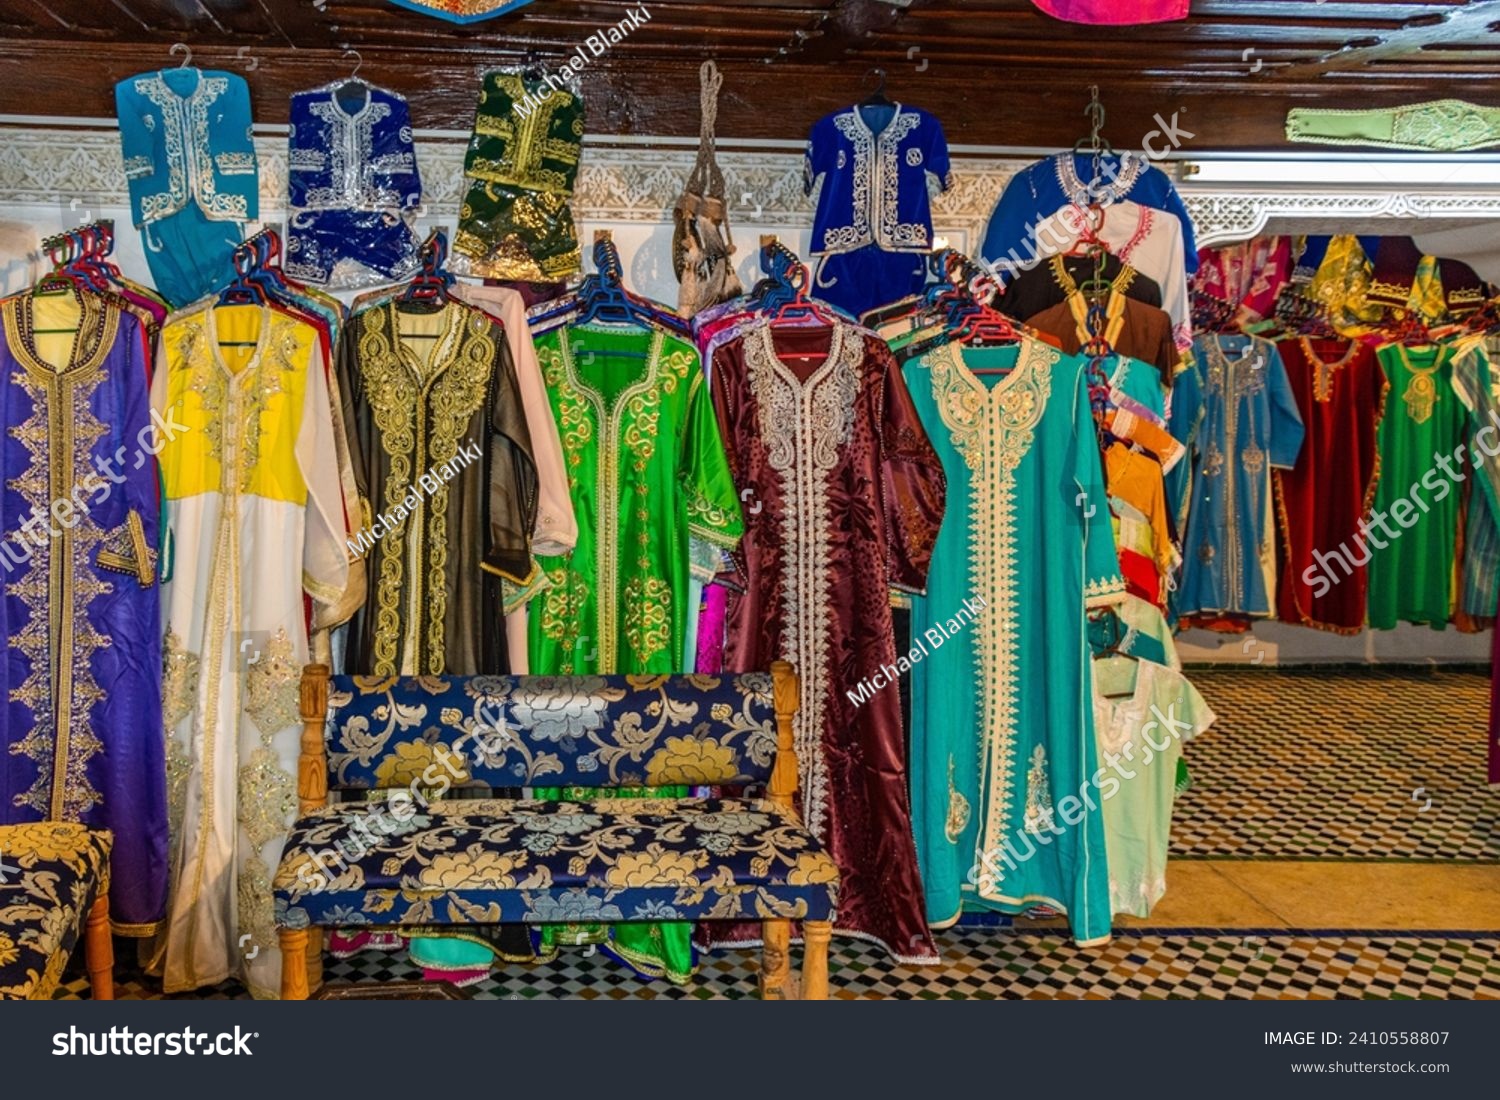 Morocco, row of typical colourful womens embroidered djellaba tunics for sale #2410558807